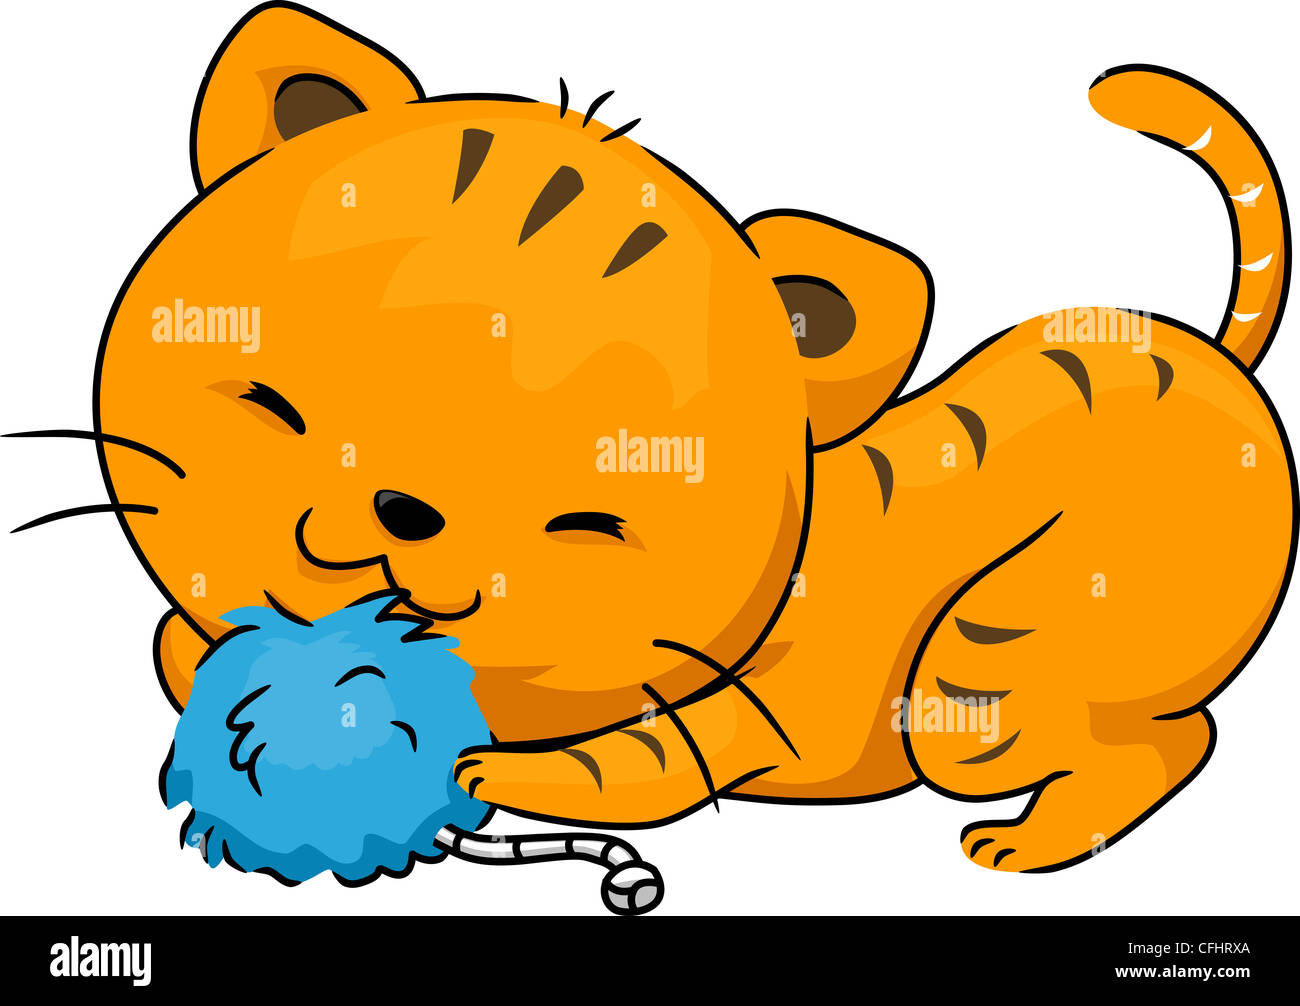 Illustration of a Cat Playing with a Catnip Toy Stock Photo